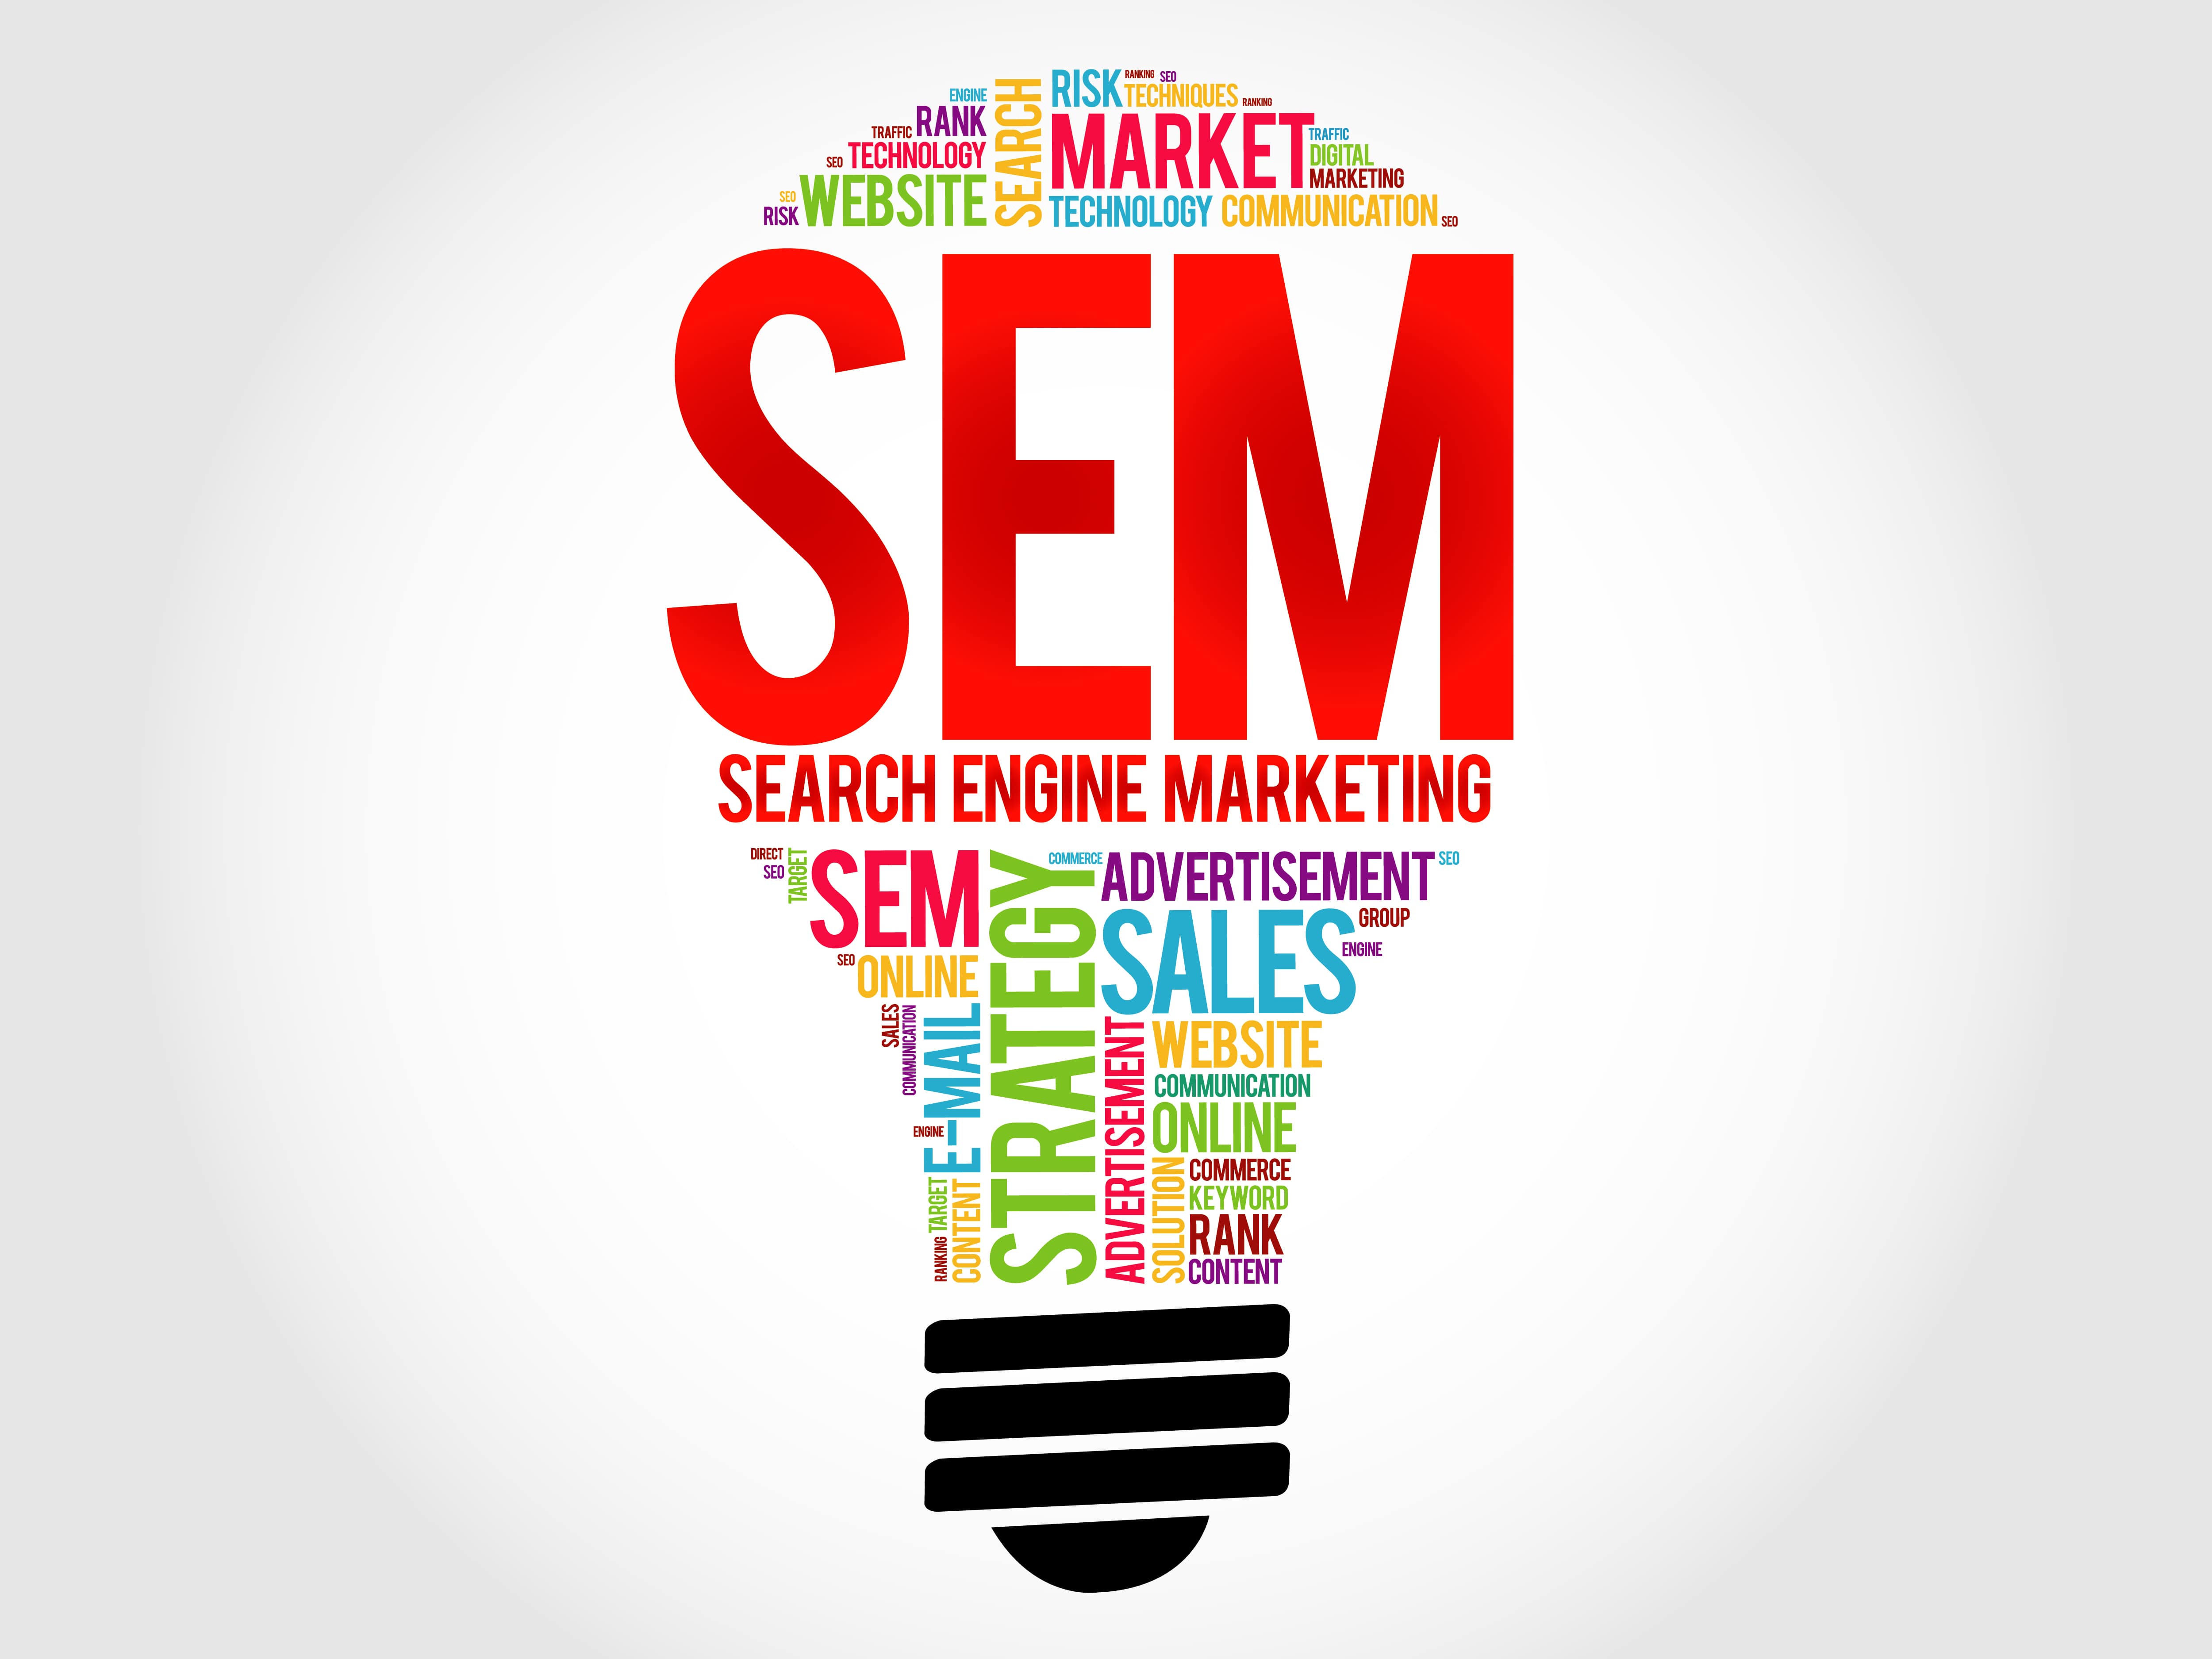 Connecting with customers through Search Engine Marketing